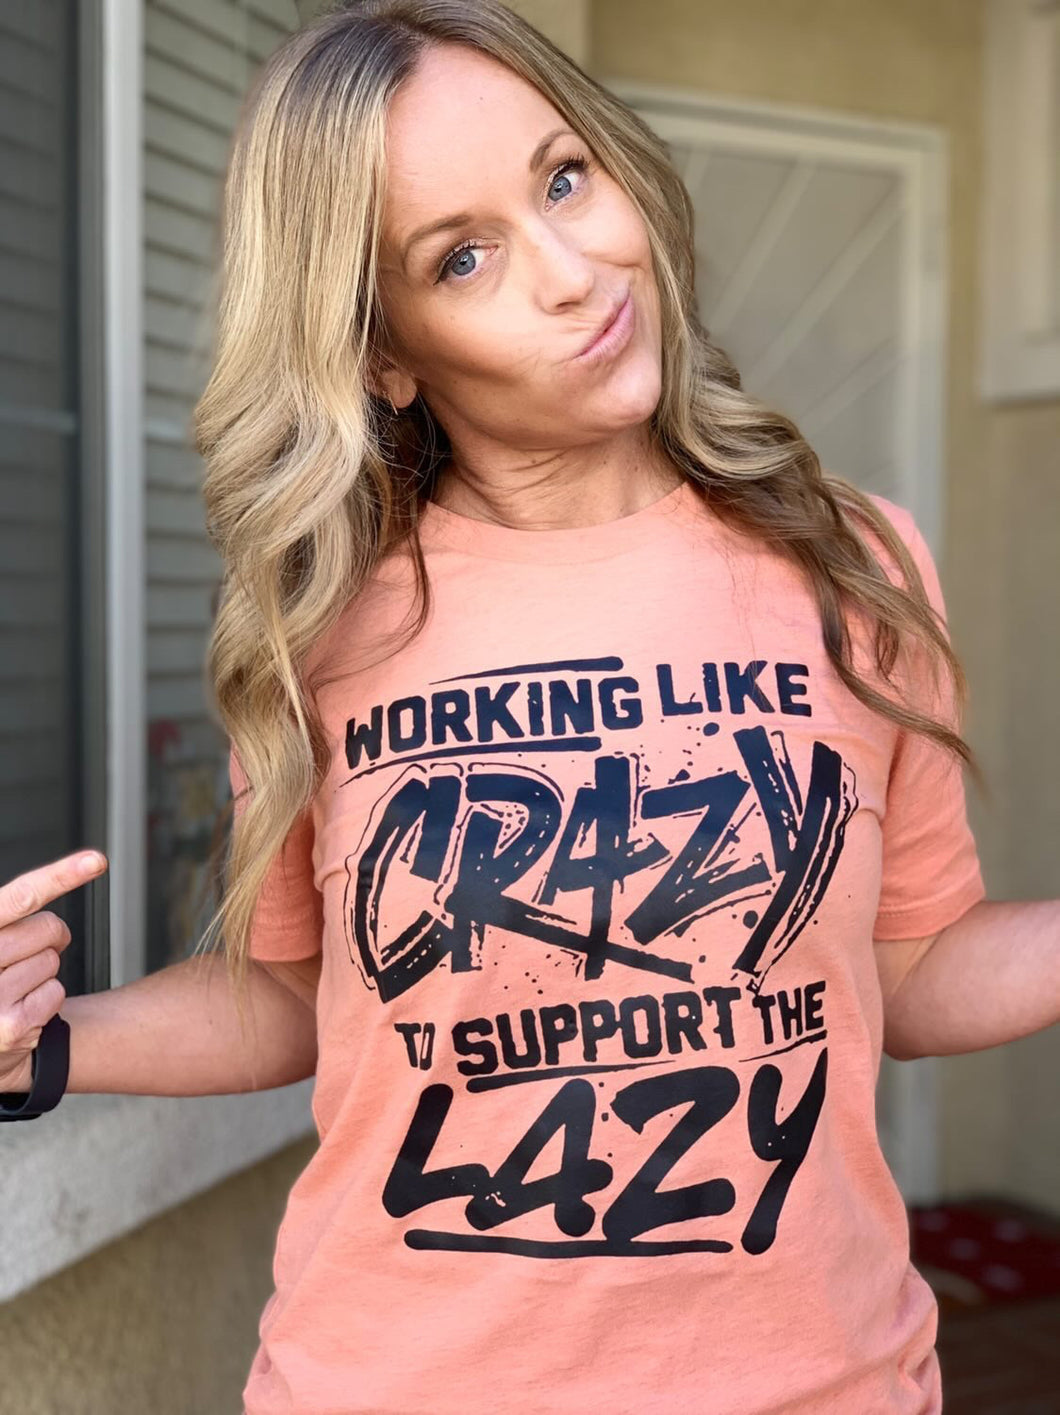 WORKING LIKE CRAZY TO SUPPORT THE LAZY(OTHER COLORS AVAILABLE)